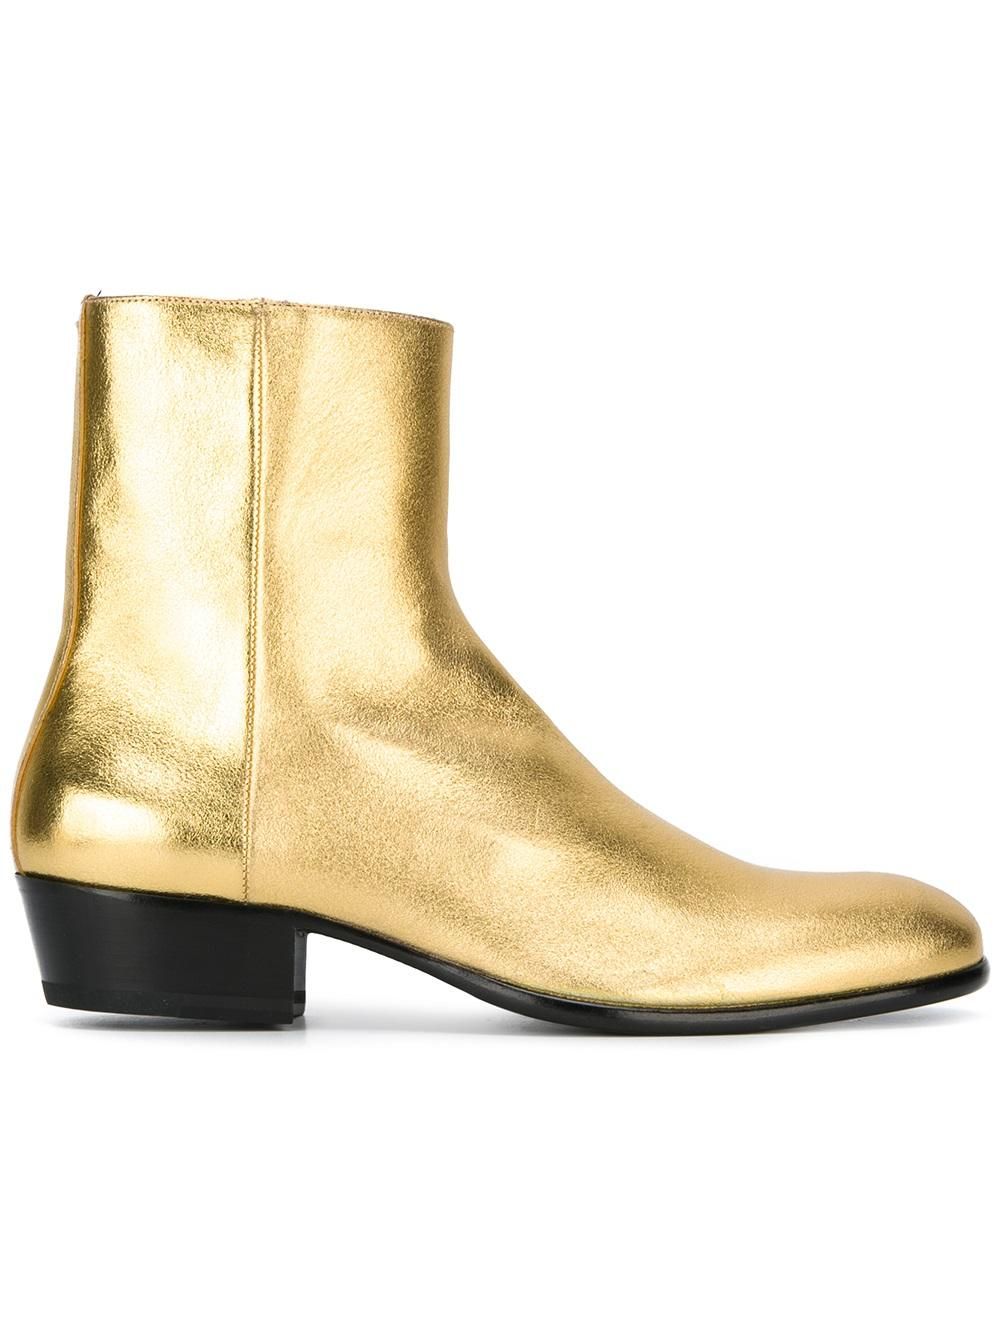 Classic Western Boot In Gold Metallic Leather Ankle Boots Fall Chelsea ...